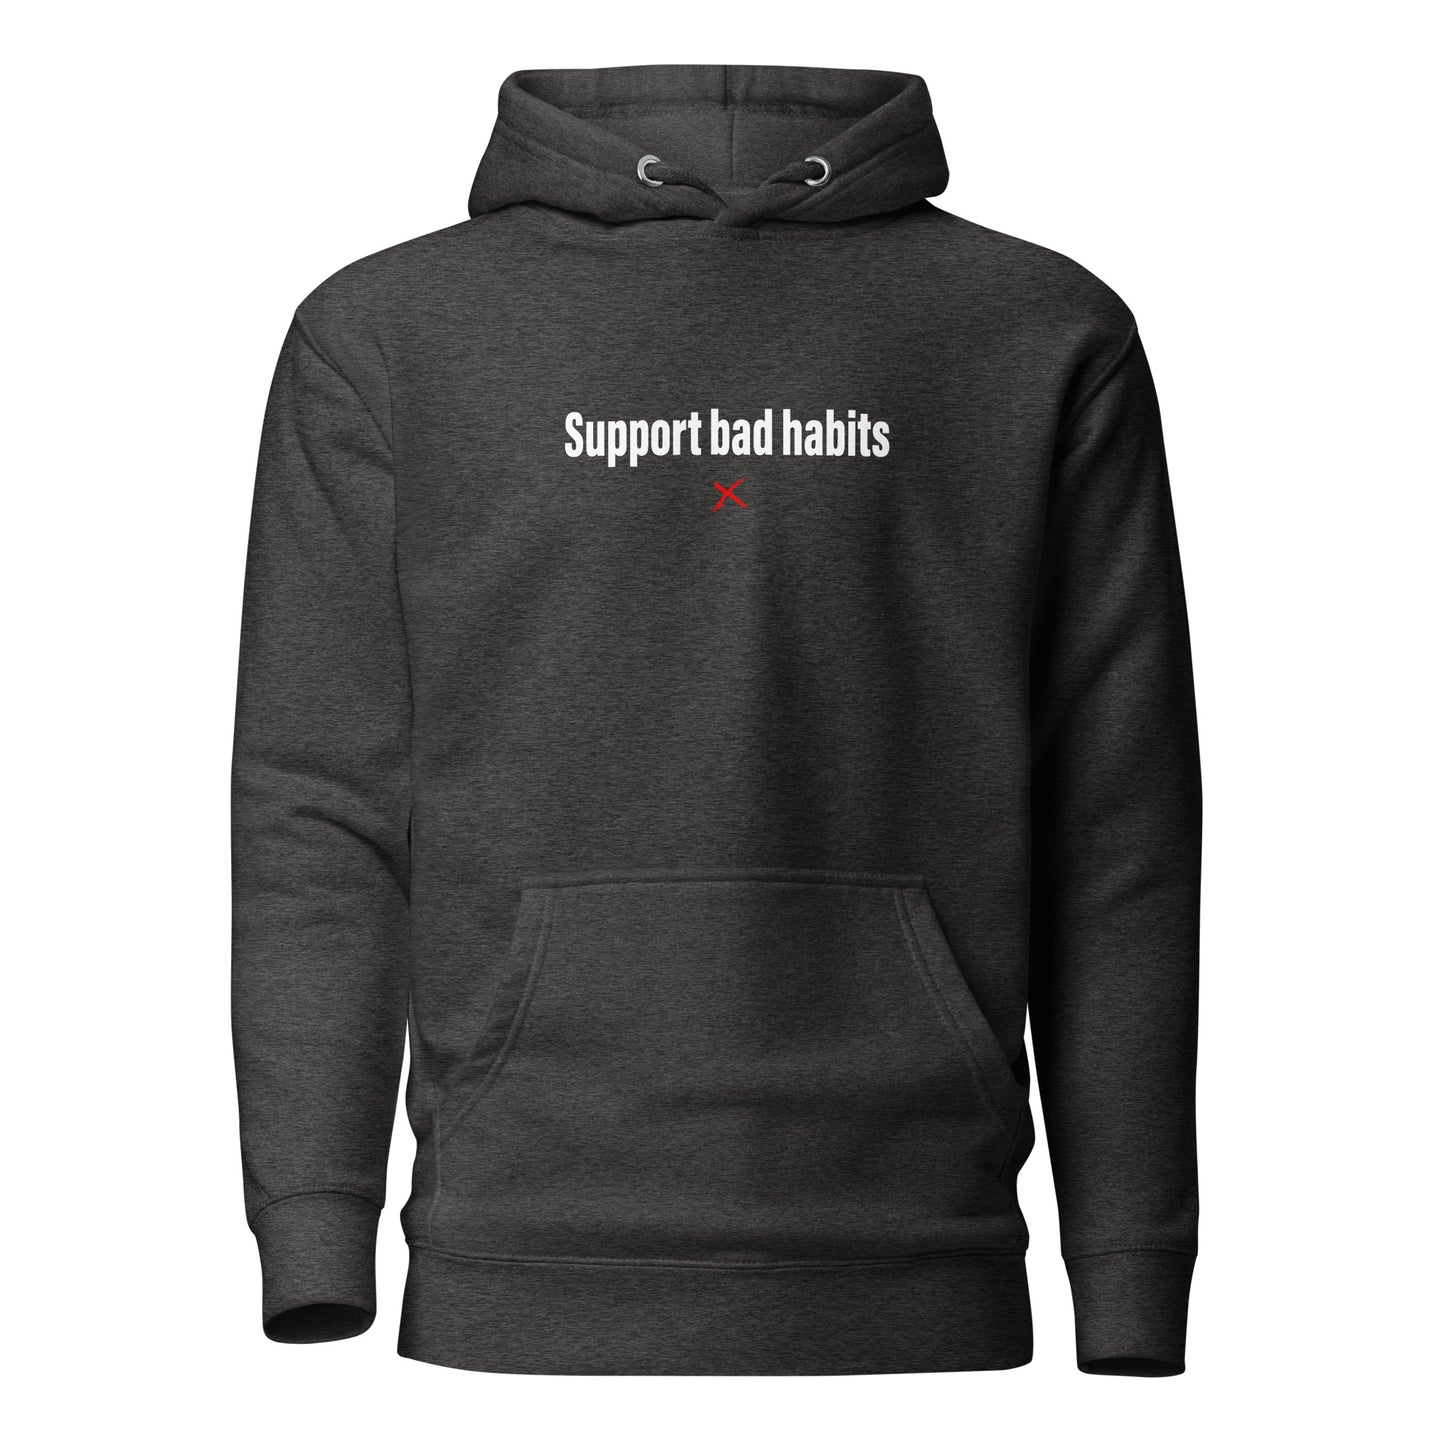 Support bad habits - Hoodie